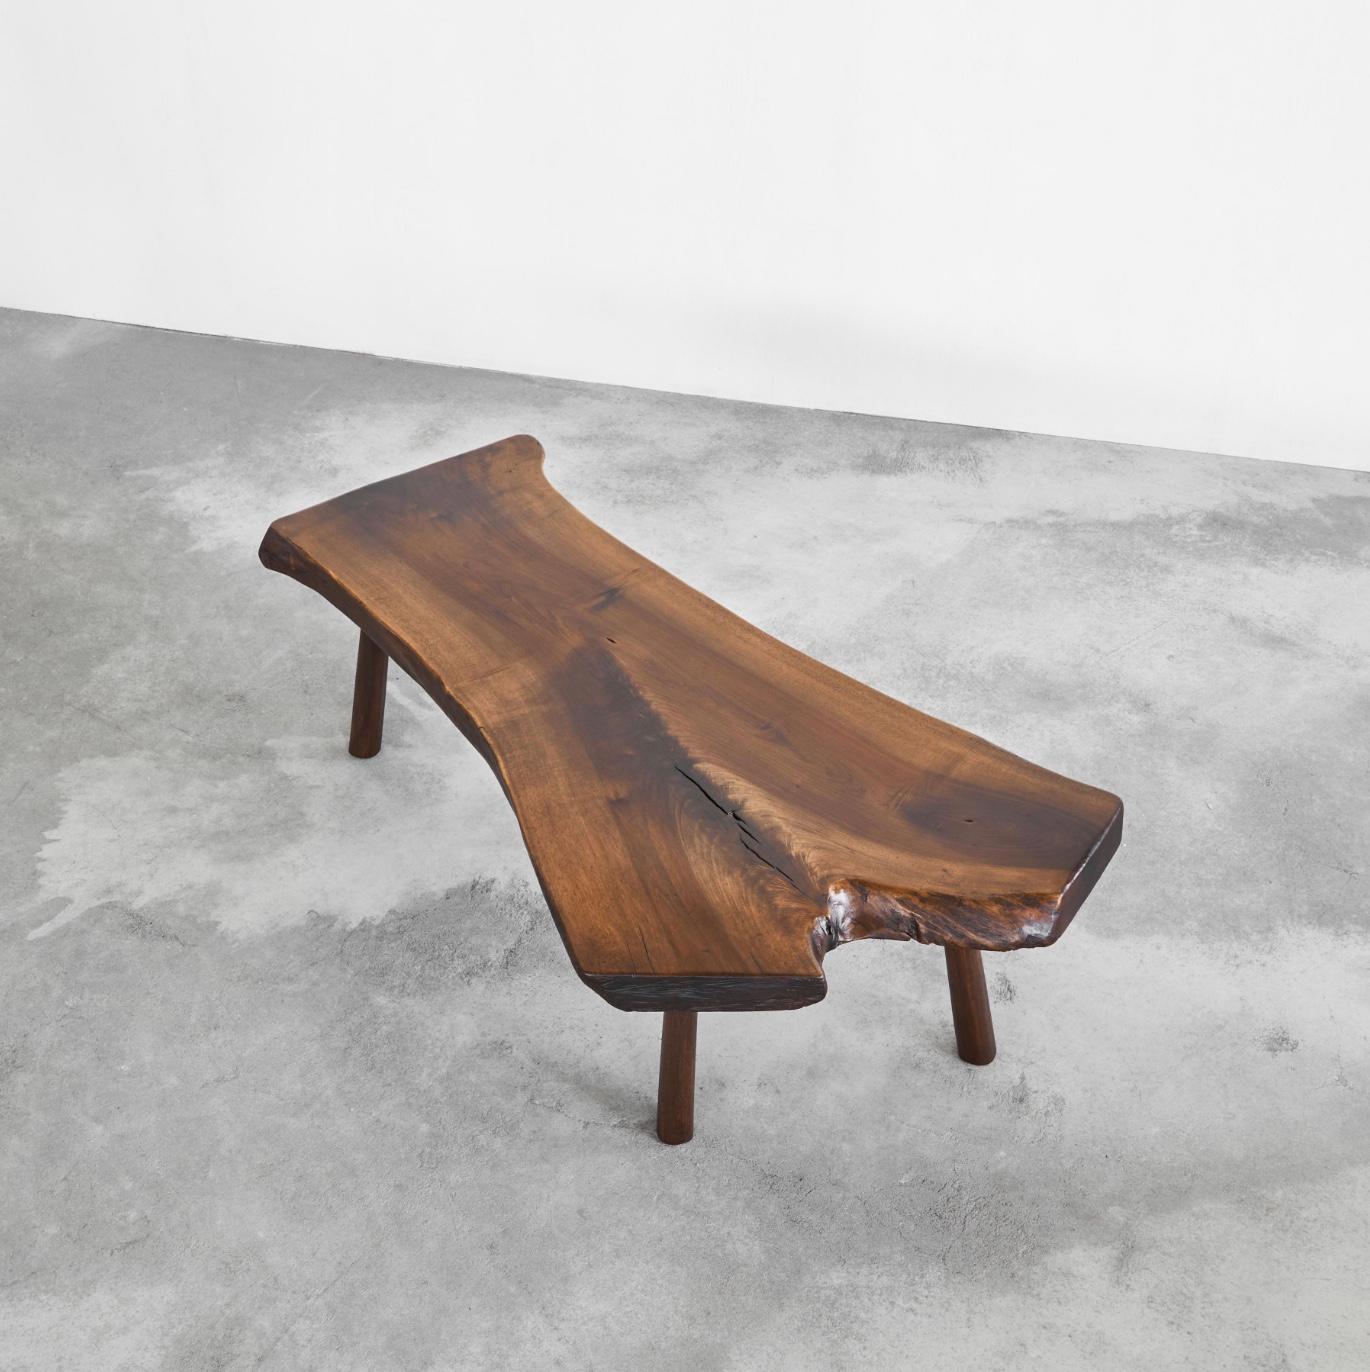 Mid-Century Live Edge Coffee Table in Solid Walnut, Europe, 1950s. Fully restored.

This is a stunning and very elegant live edge coffee table made out of solid walnut by a European cabinetmaker in the 1950s. Made on request for the first owner in